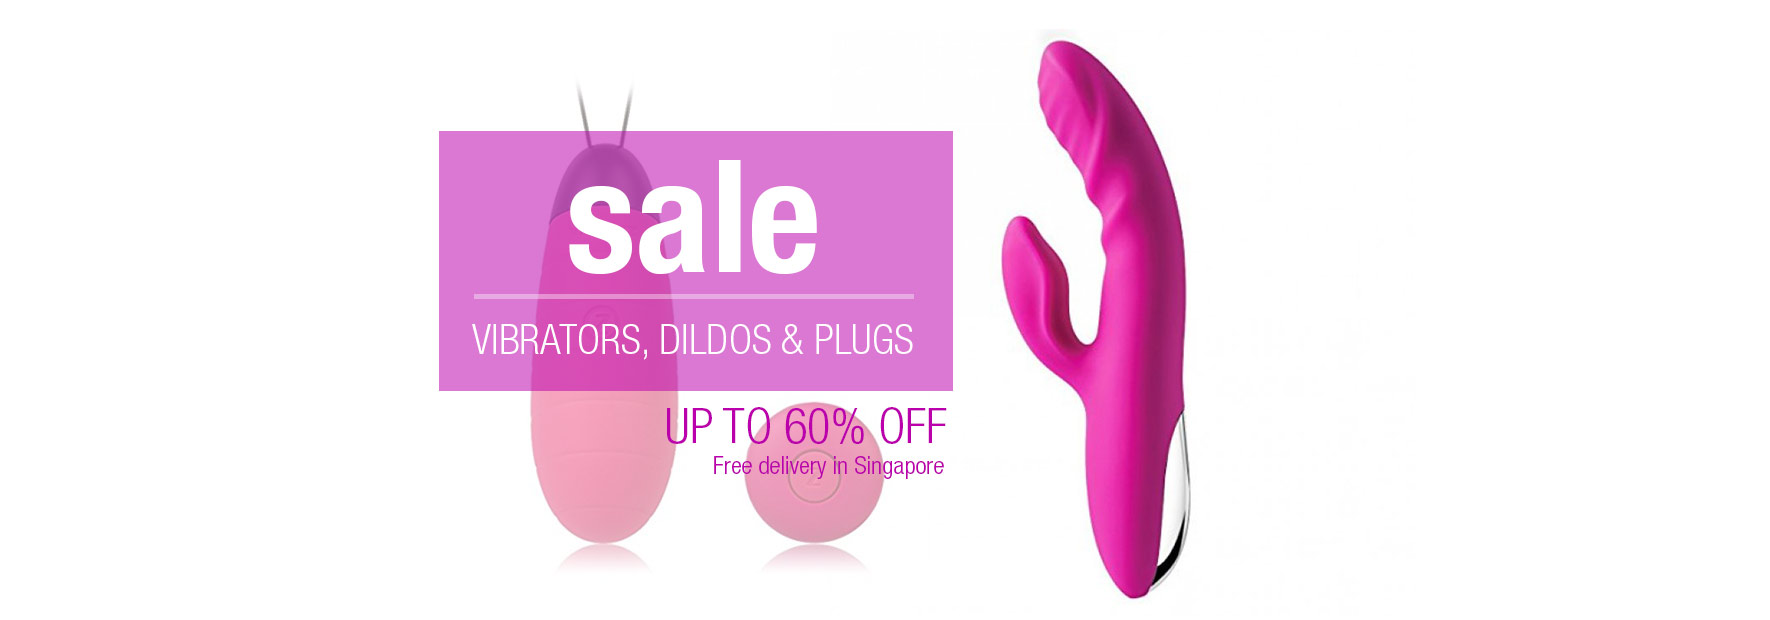 Vibrator and Dildo Sale Free Delivery for Singapore